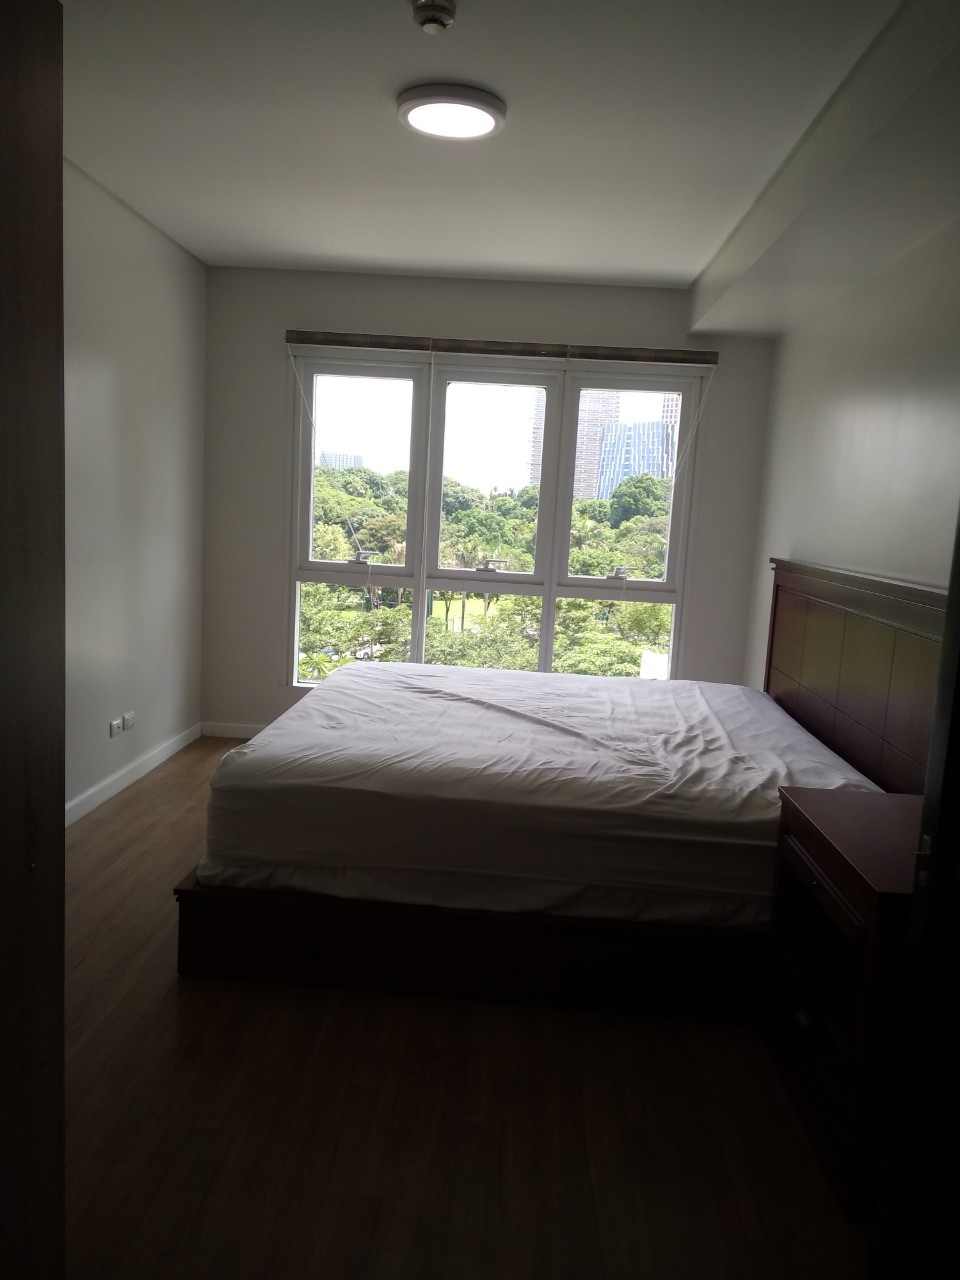 3BR Condo For Lease, The Sequoia at Two Serendra 7